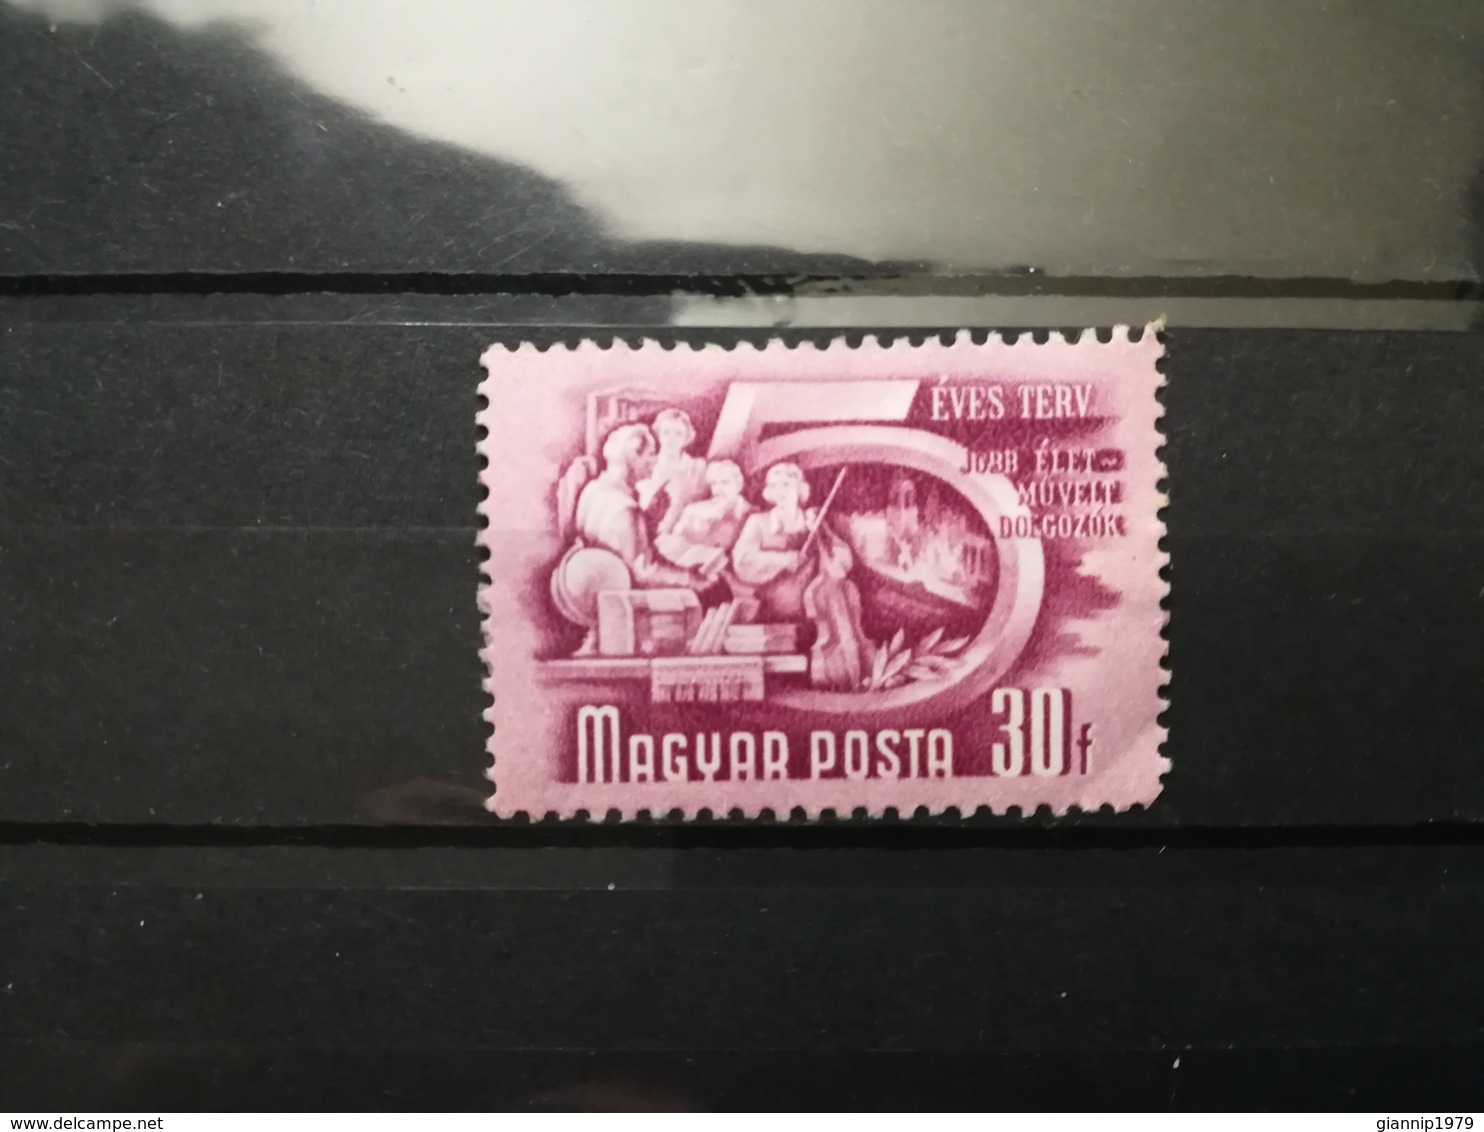 FRANCOBOLLI STAMPS UNGHERIA MAGYAR POSTA 1950 USED PLAN FIVE PIANO QUINQUENNALE HUNGARY - Used Stamps